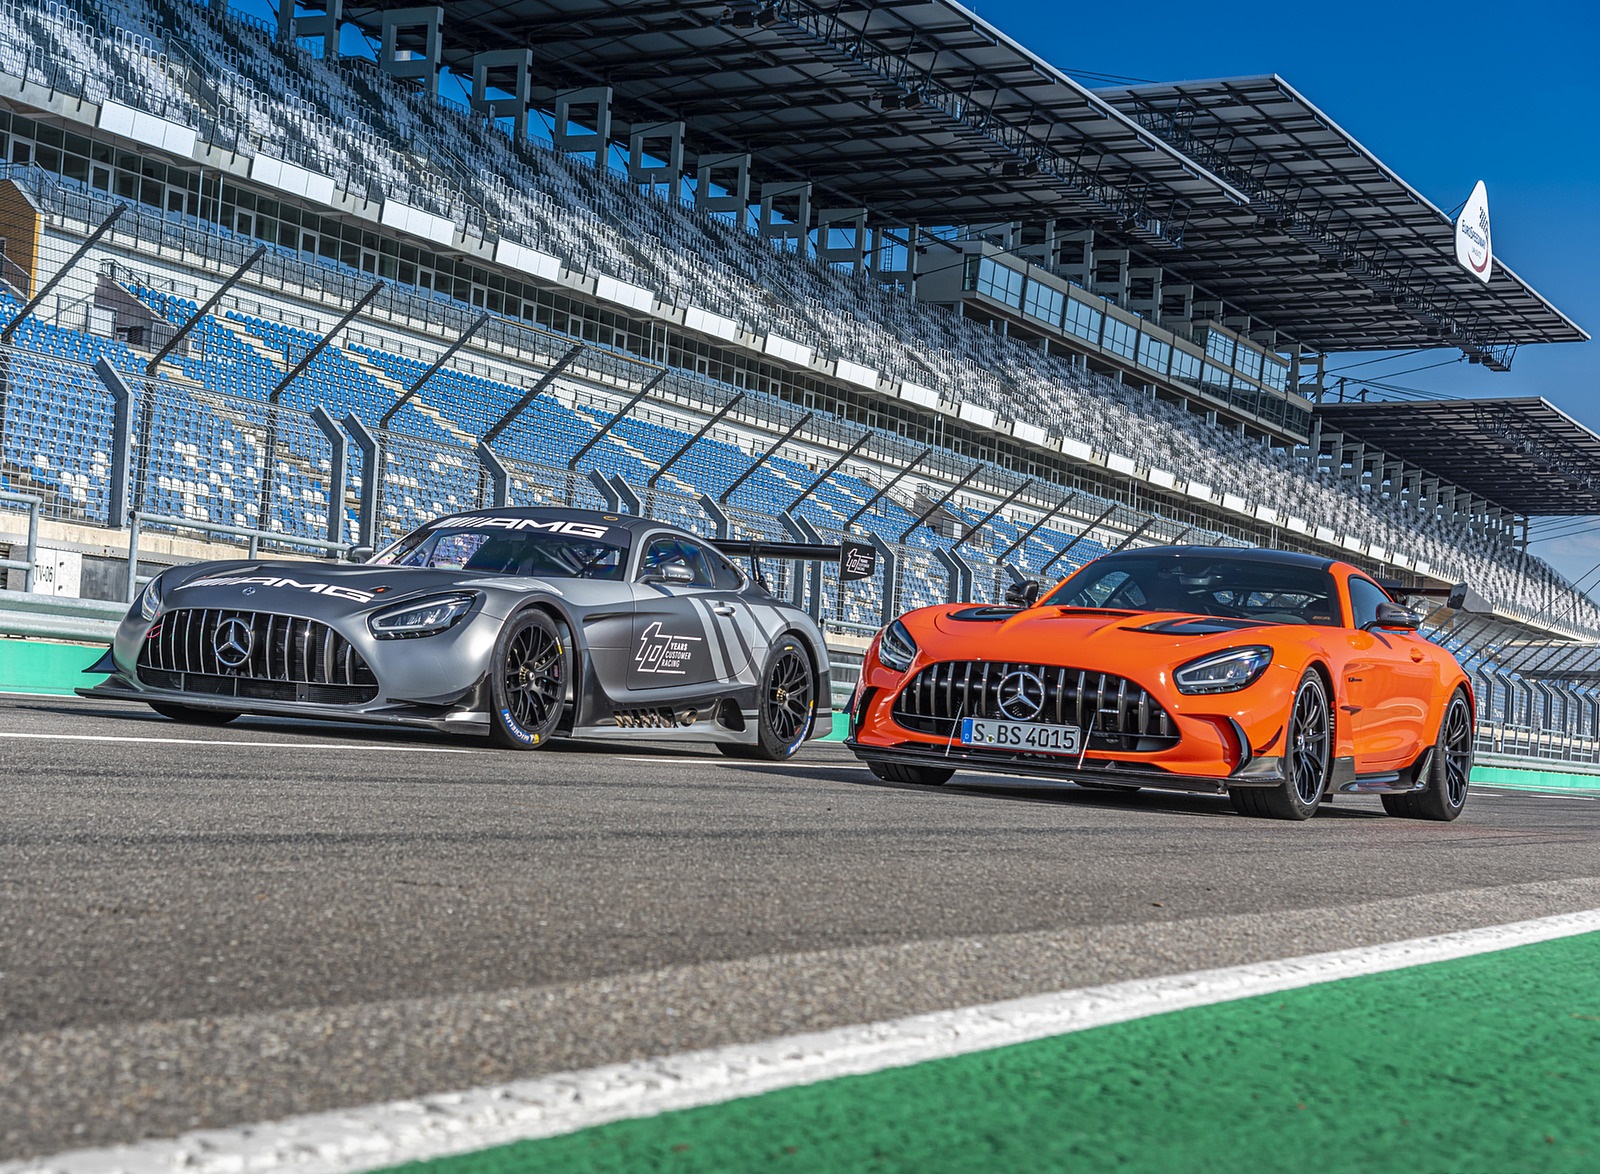 2021 Mercedes-AMG GT Black Series (Color: Magma Beam) and AMG GT3 Racing Car Wallpapers  #37 of 204